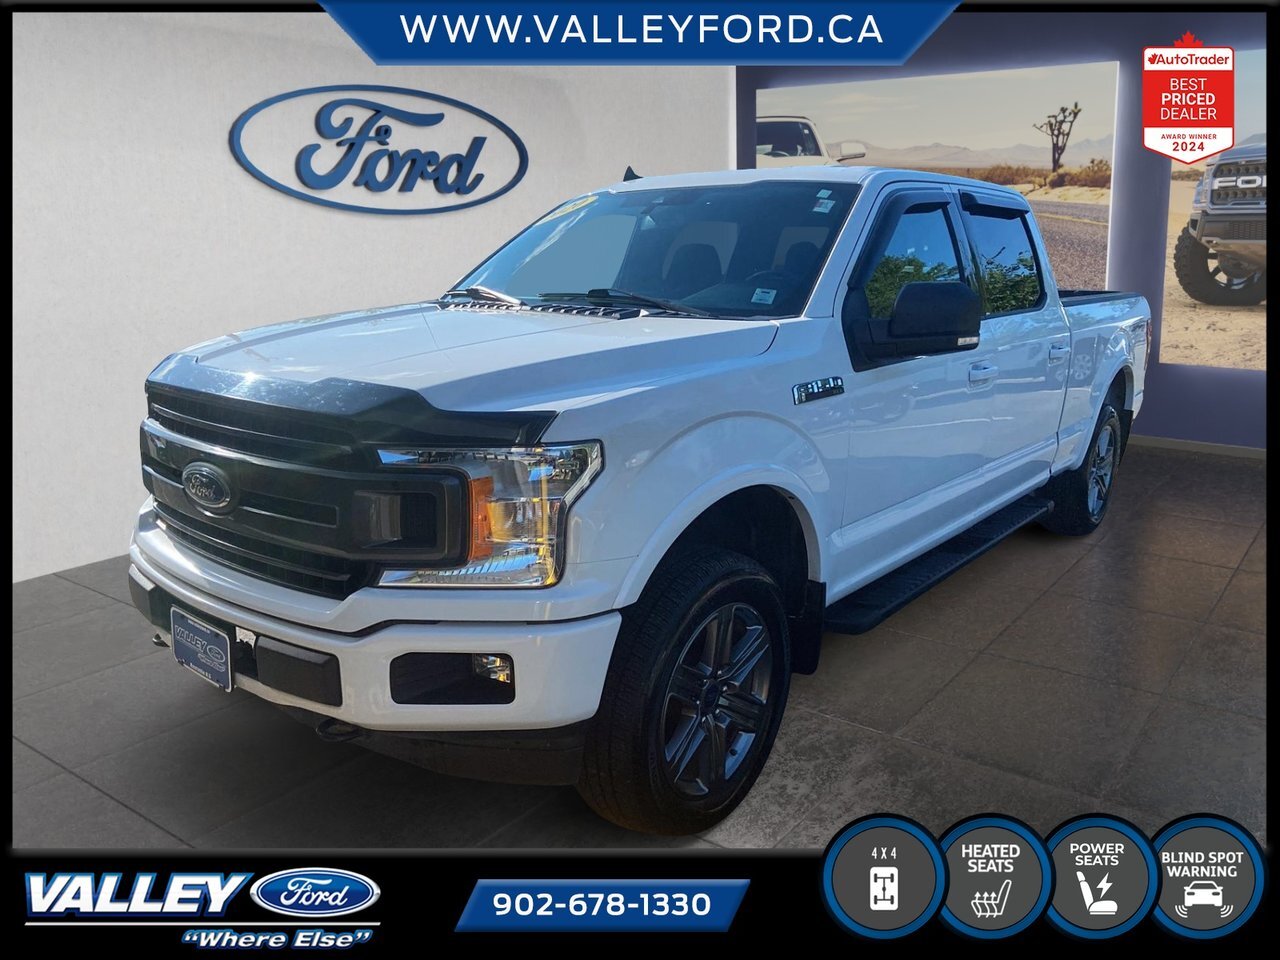 2020 Ford F-150 XLT 5 LITRE/302A/SPRAY IN LINER